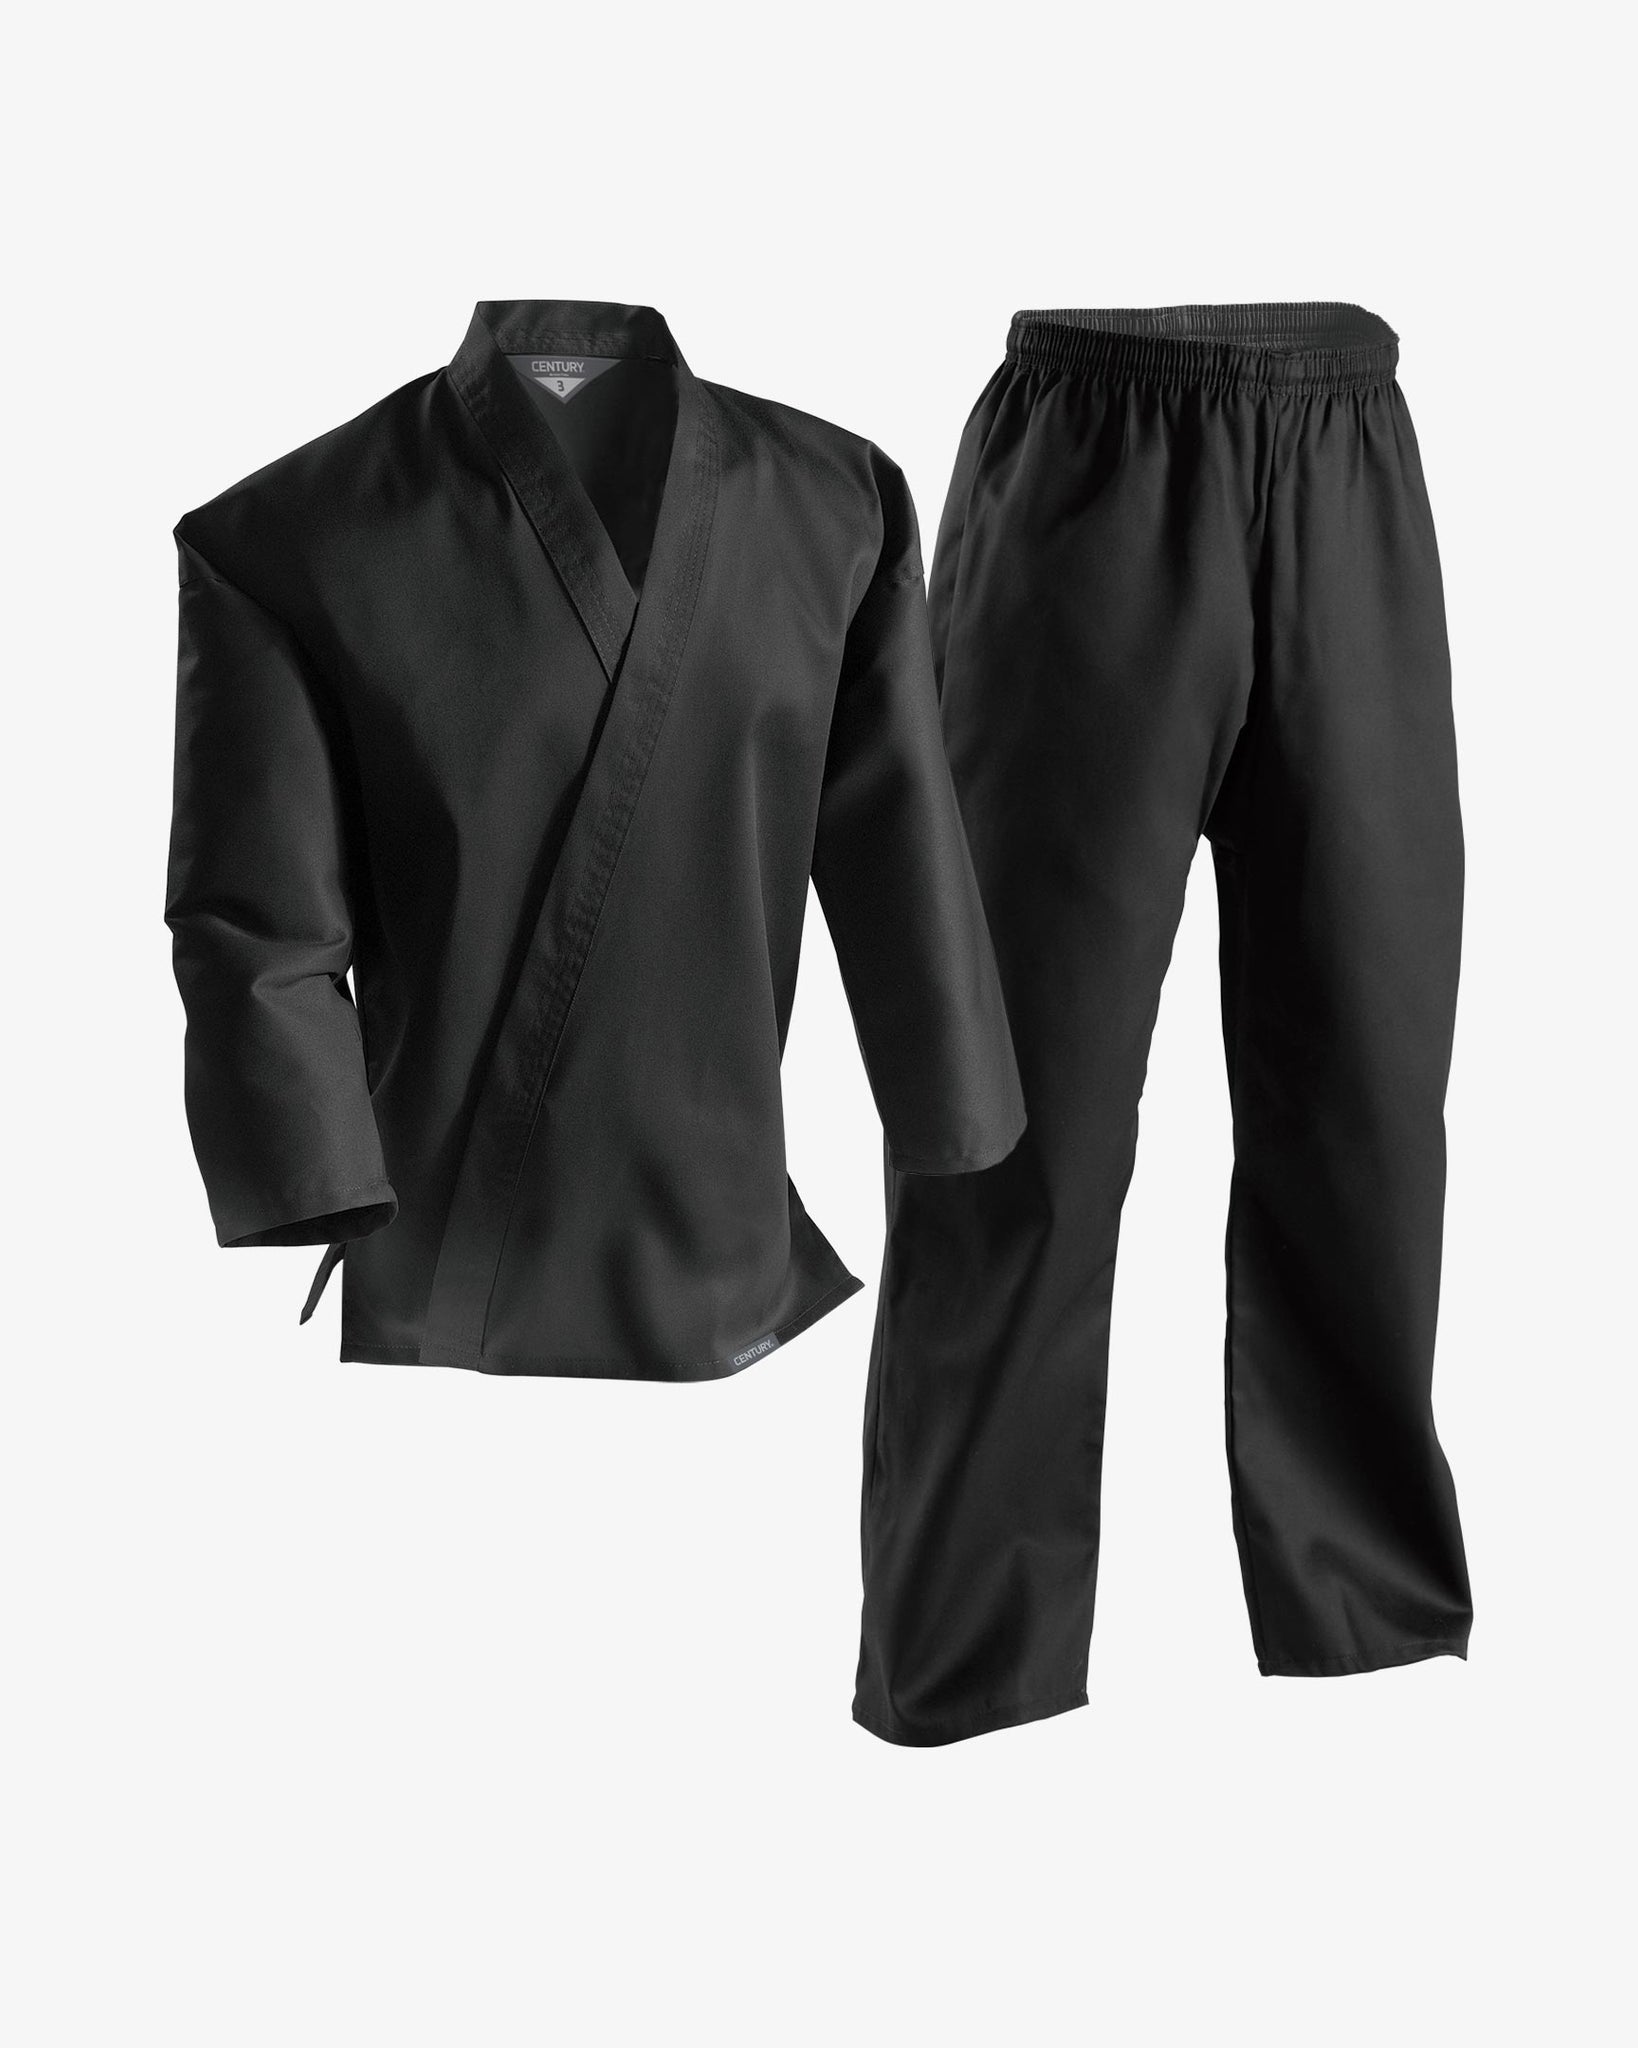 7 oz. Middleweight Student Uniform with Elastic Pant Black